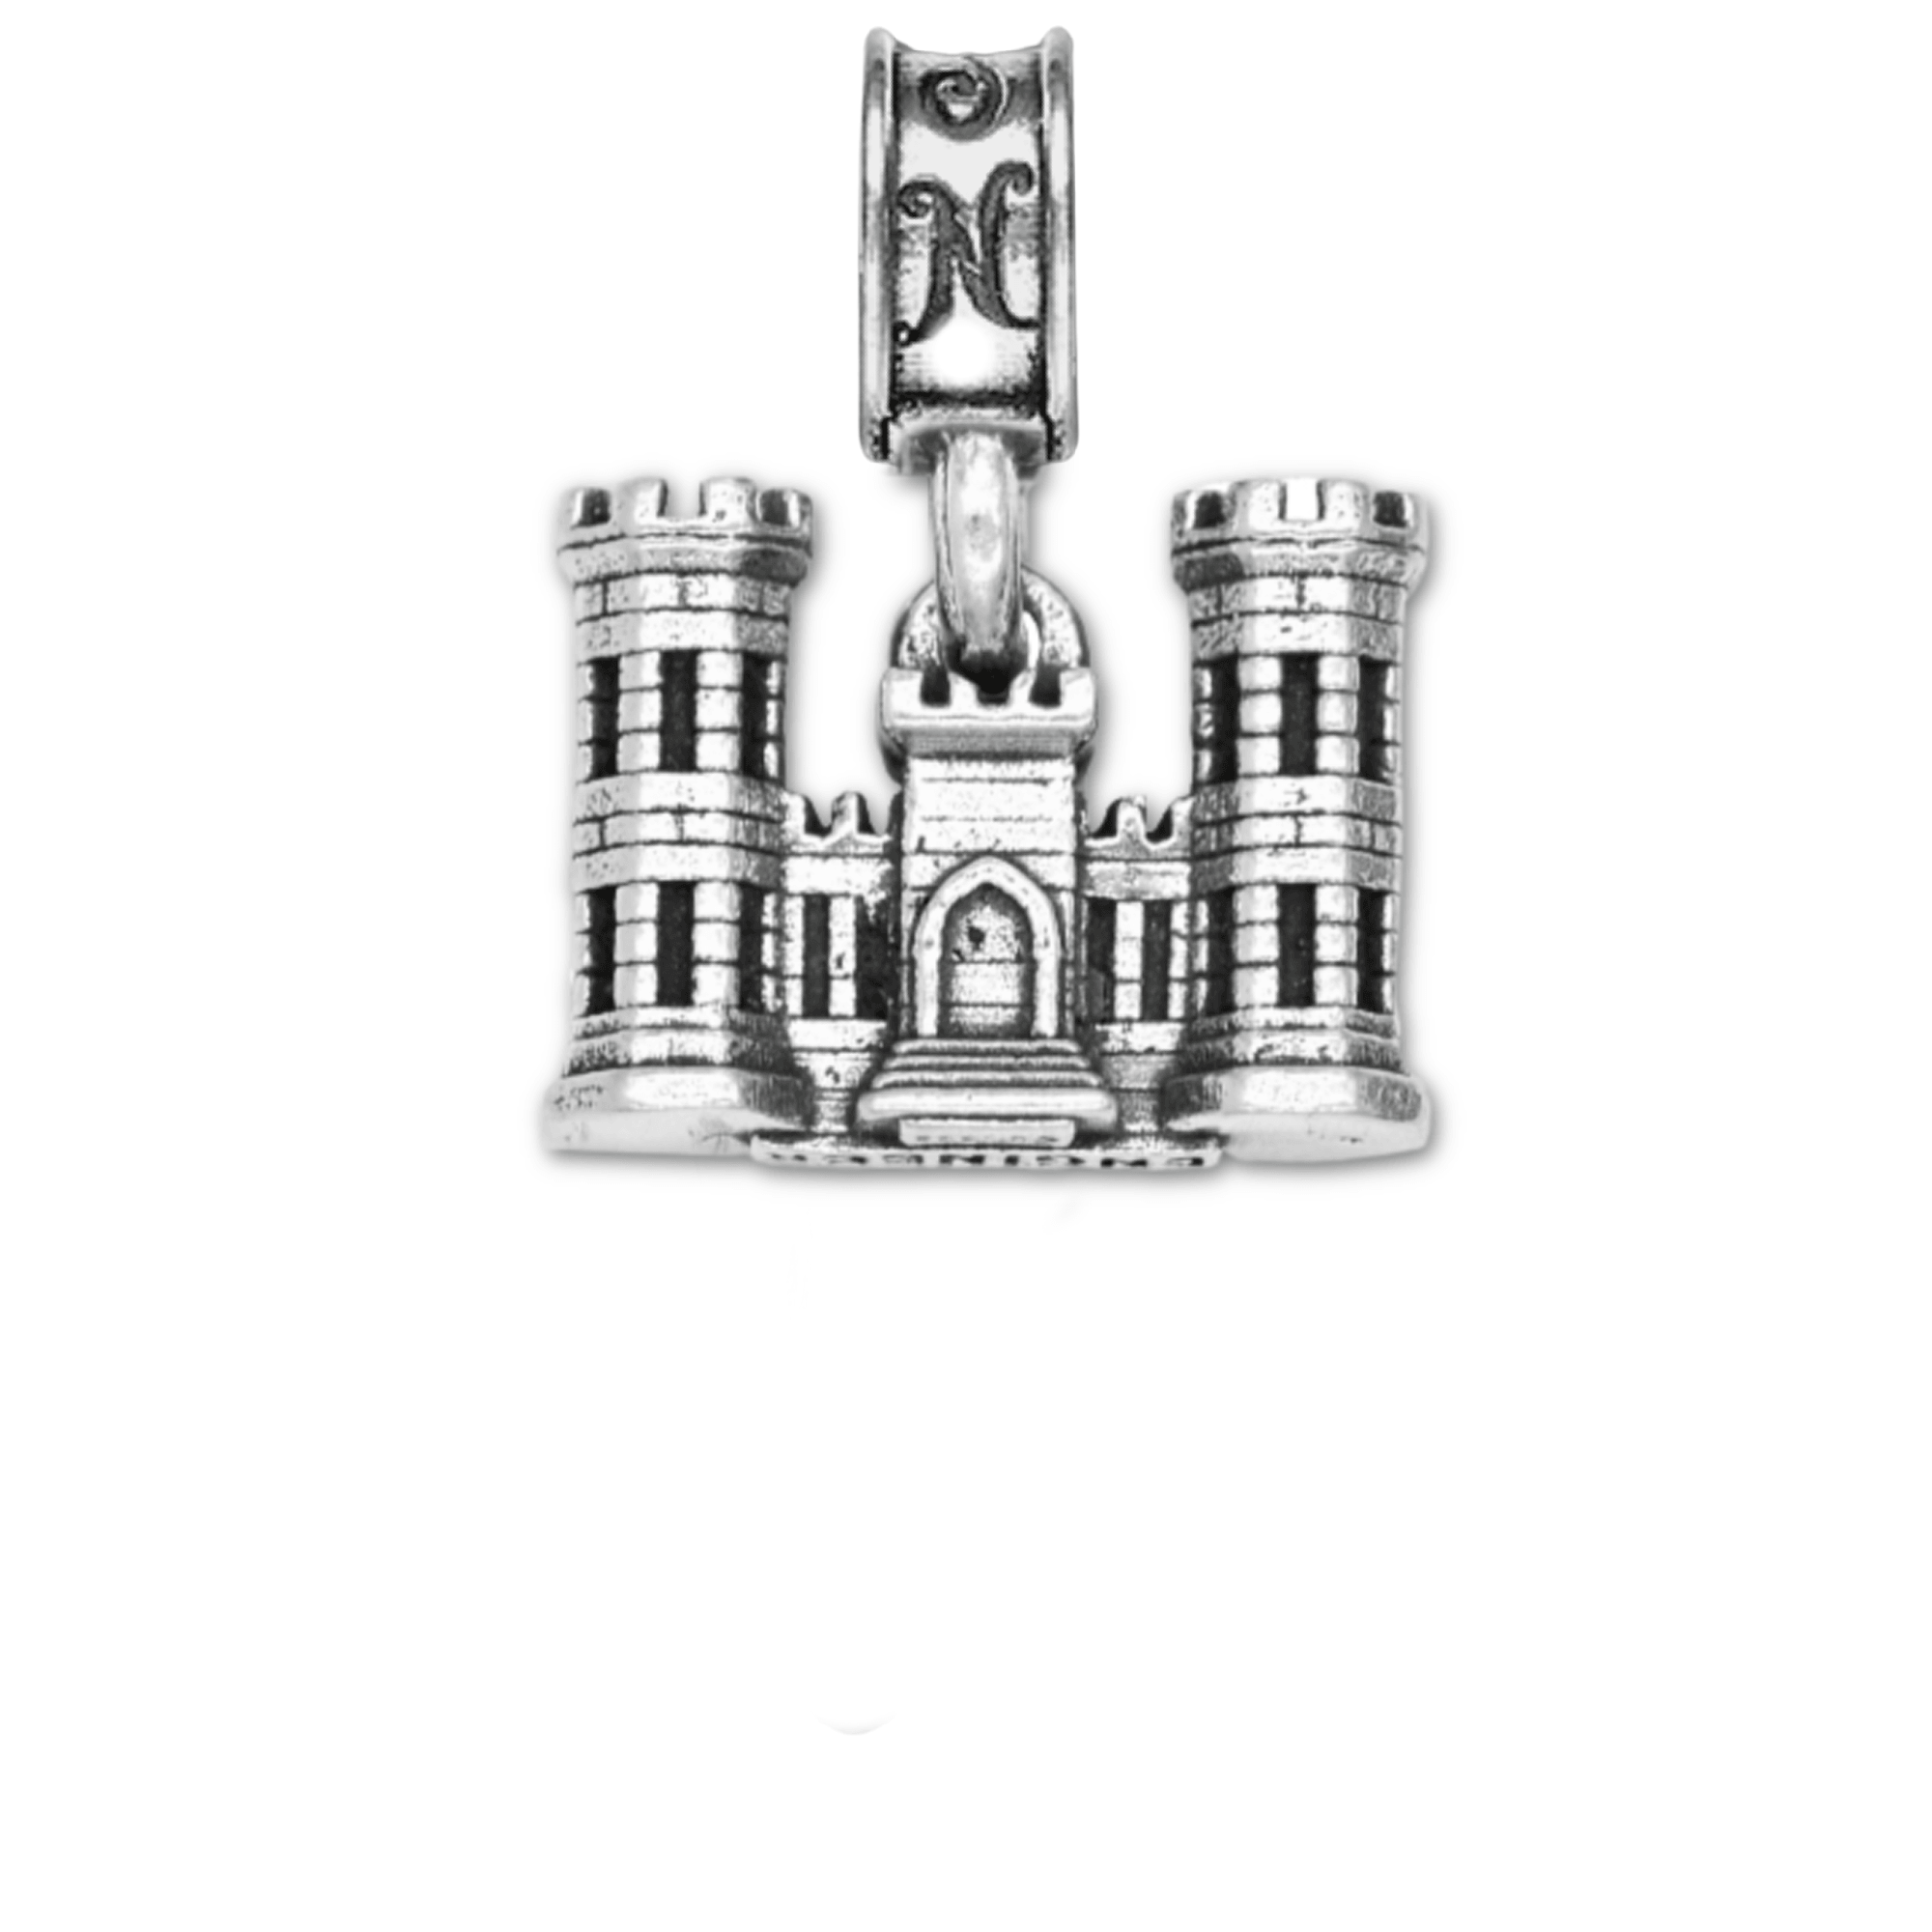 Military Jewelry, Military Charms, Military Gifts, Engineer Castle